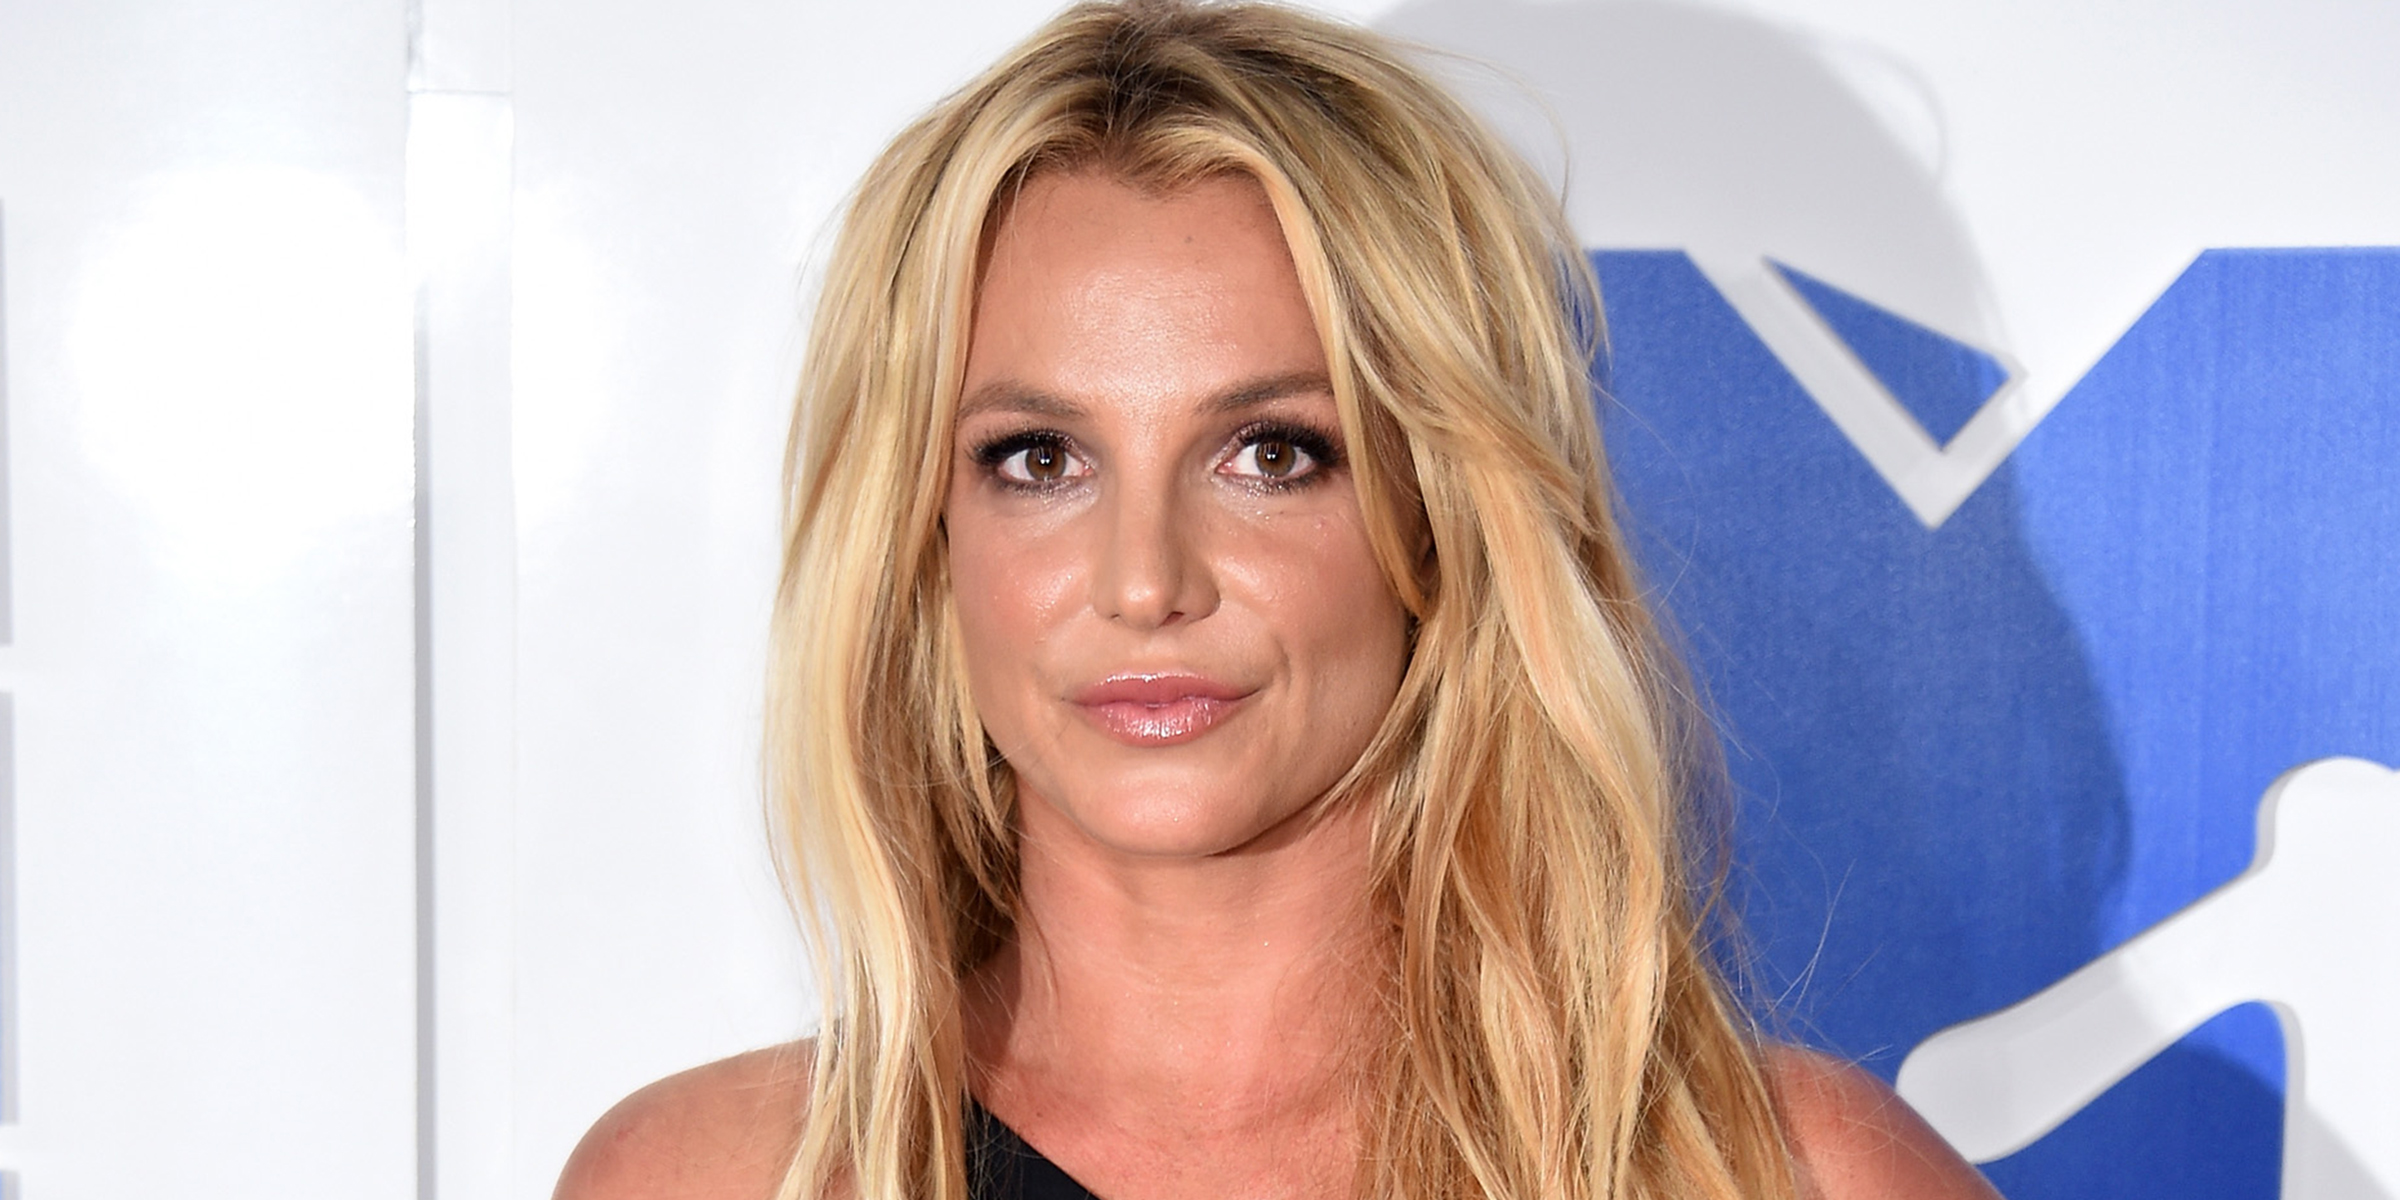 Britney Spears is Reportedly 'Afraid' of Her Father, Refuses to Perform After Failing to Remove Him From Conservatorship